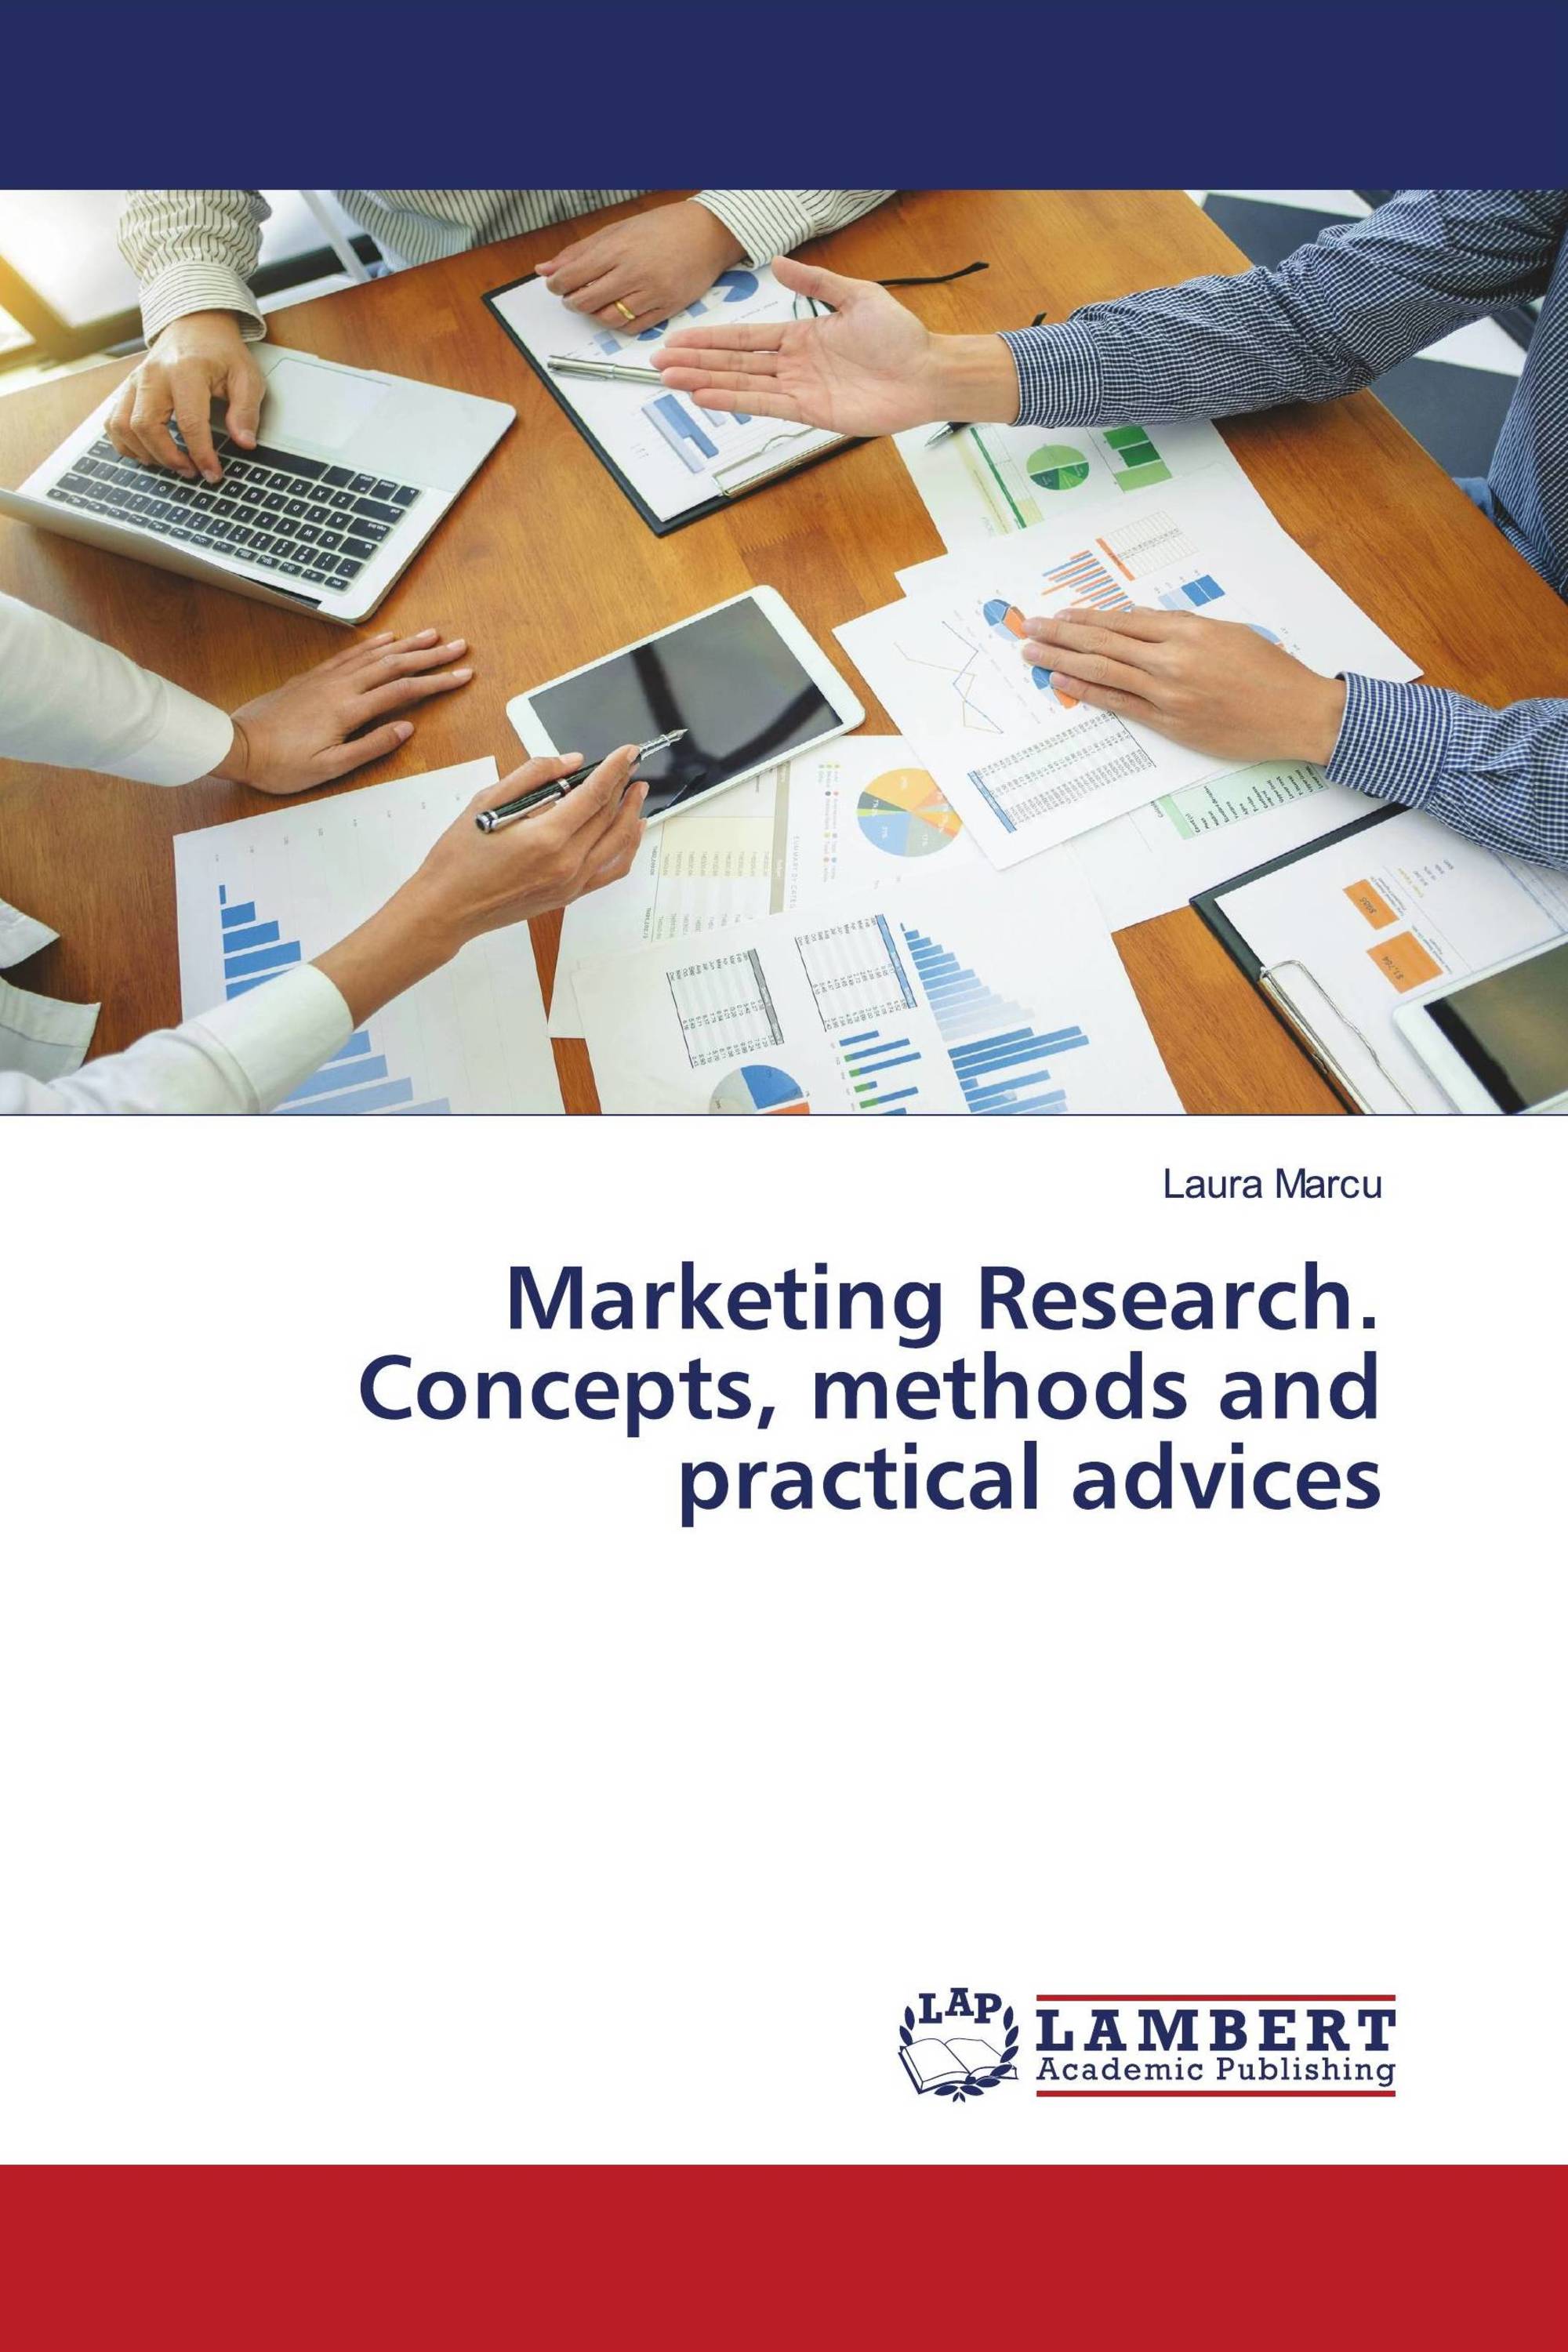 Marketing Research. Concepts, methods and practical advices